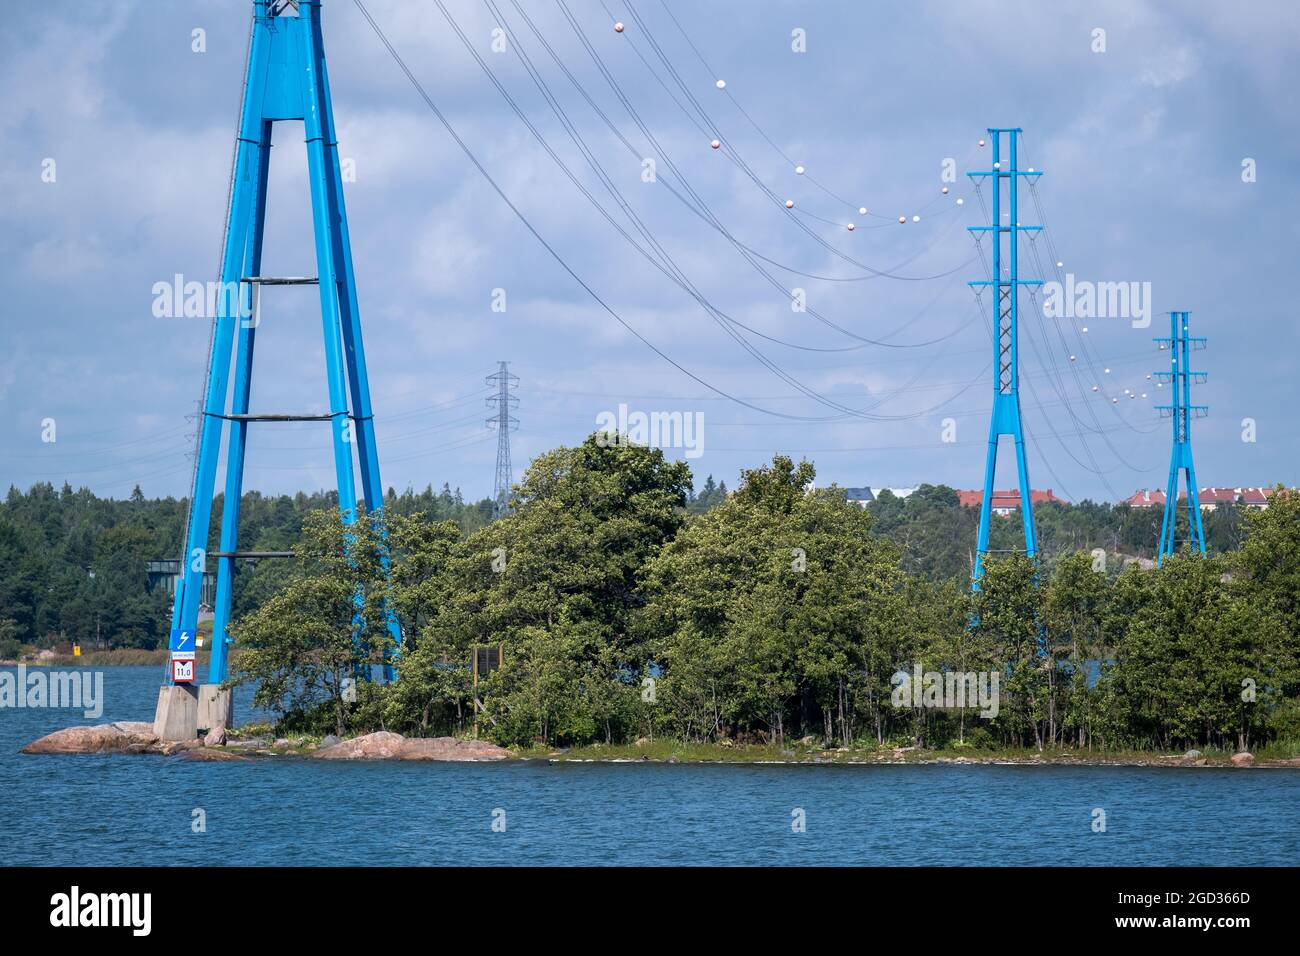 Helsinki / Finland - AUGUST 10, 2021: A line of modern high voltage electricity pylons on the shore against cloudy sky. Stock Photo